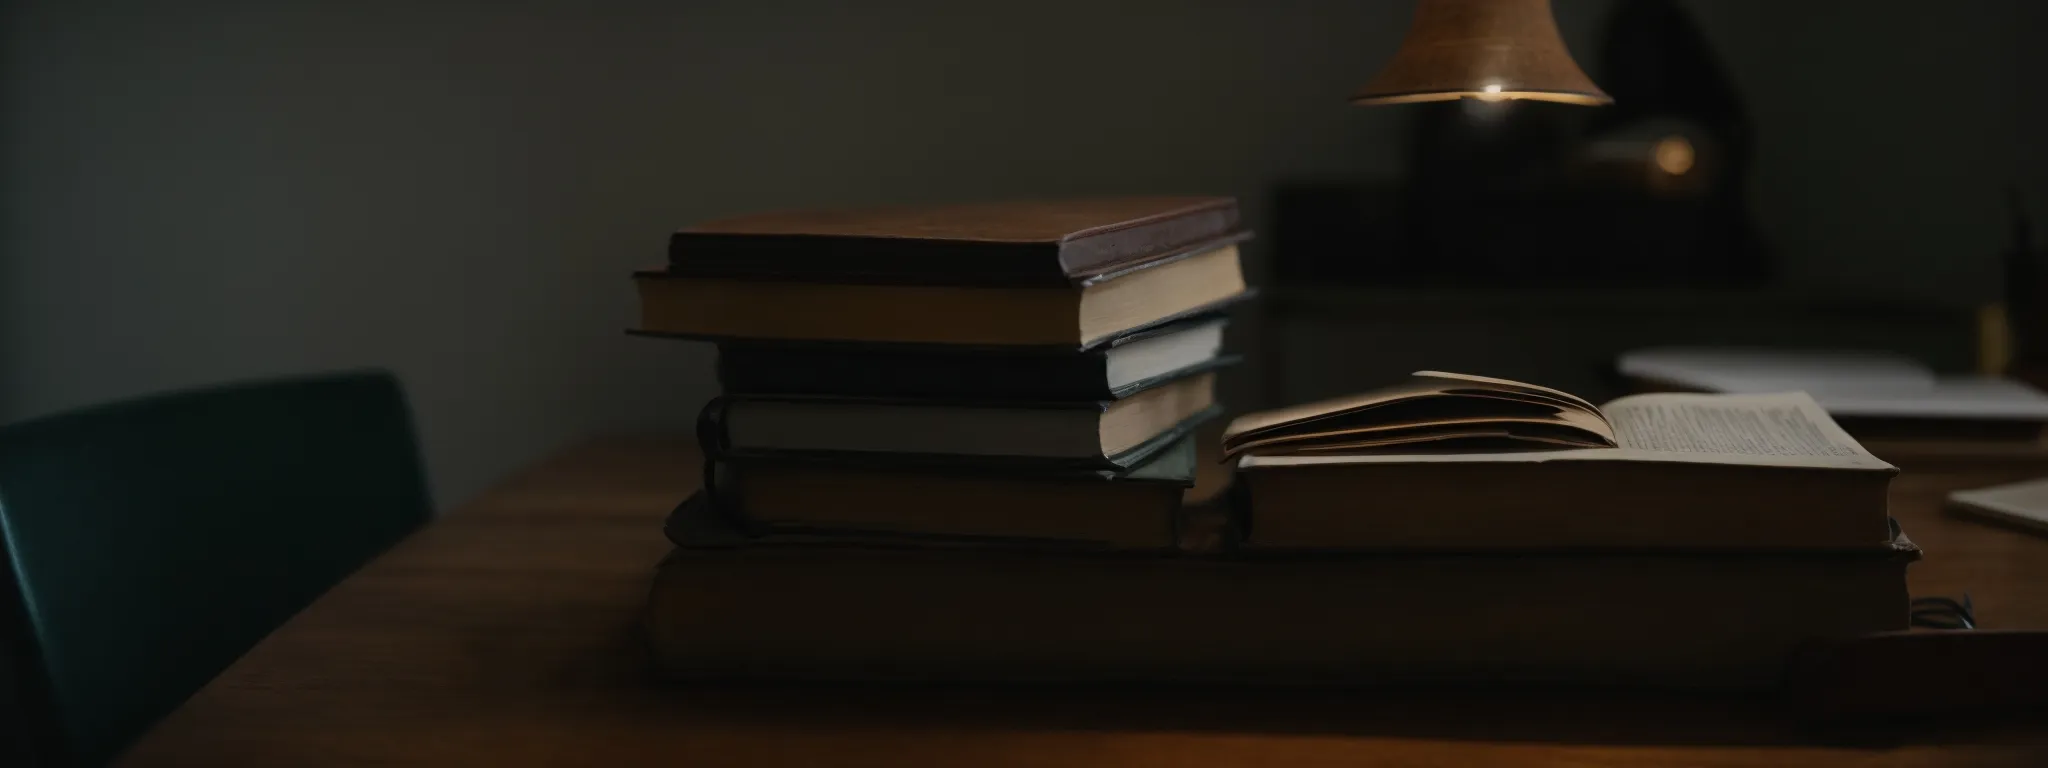 a stack of thick, dog-eared books on an oak desk, bathed in the soft glow of a desk lamp.